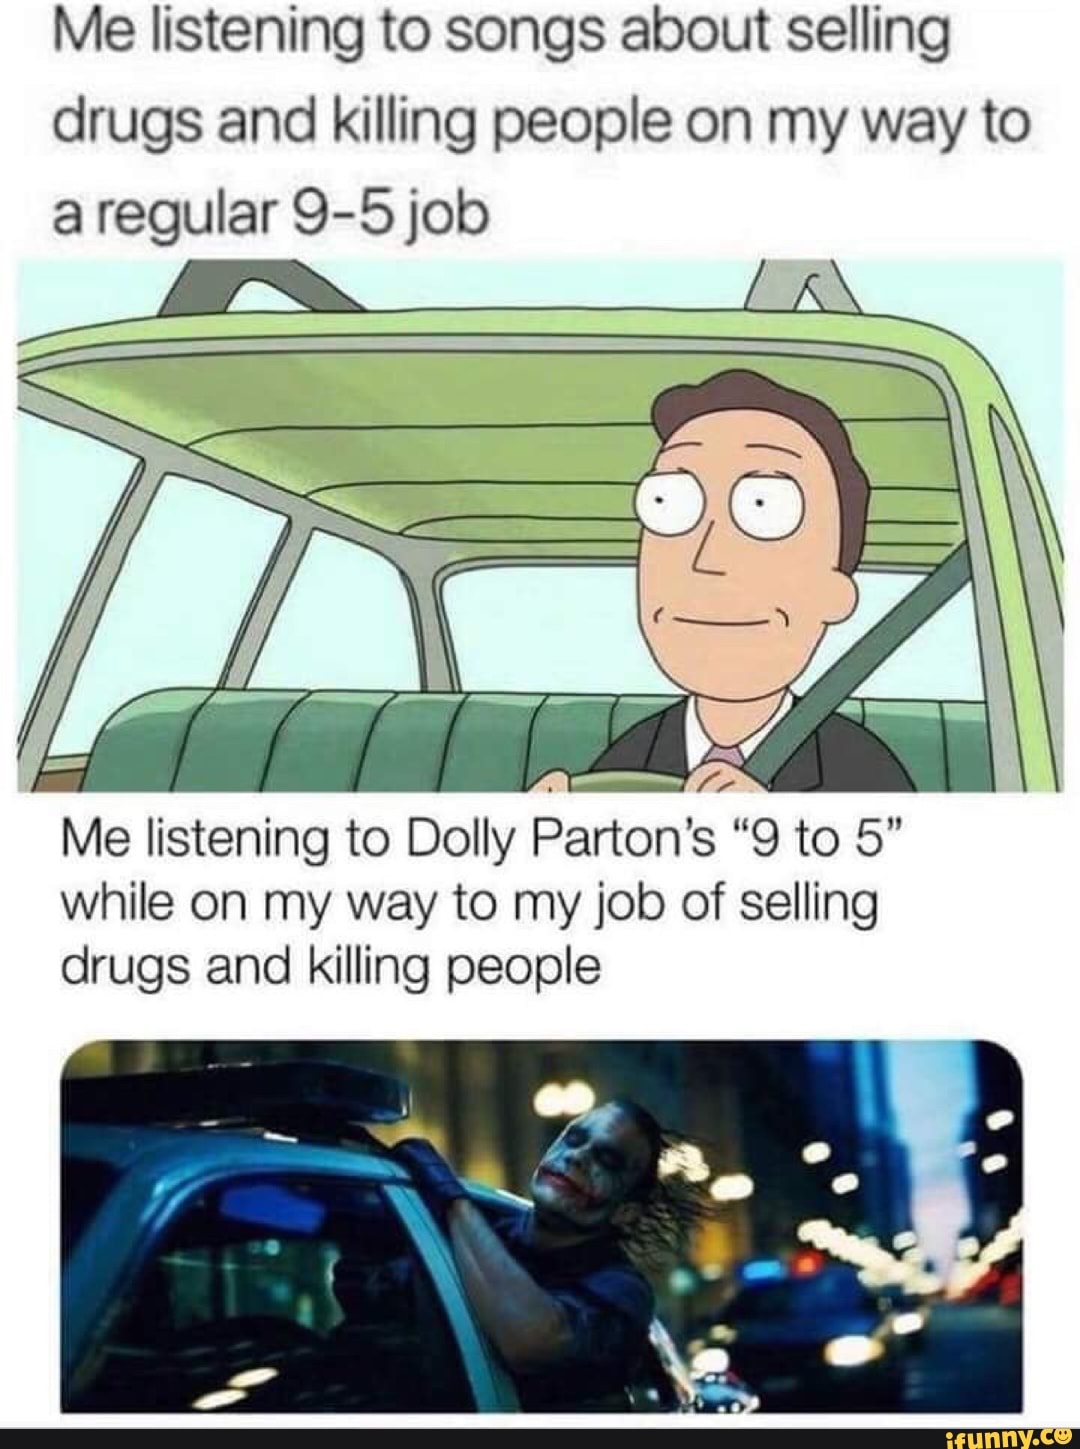 my way to my 9 5 - Me listening to songs about selling drugs and killing people on my way to a regular 95 job Me listening to Dolly Parton's "9 to 5 while on my way to my job of selling drugs and killing people ifunny.co